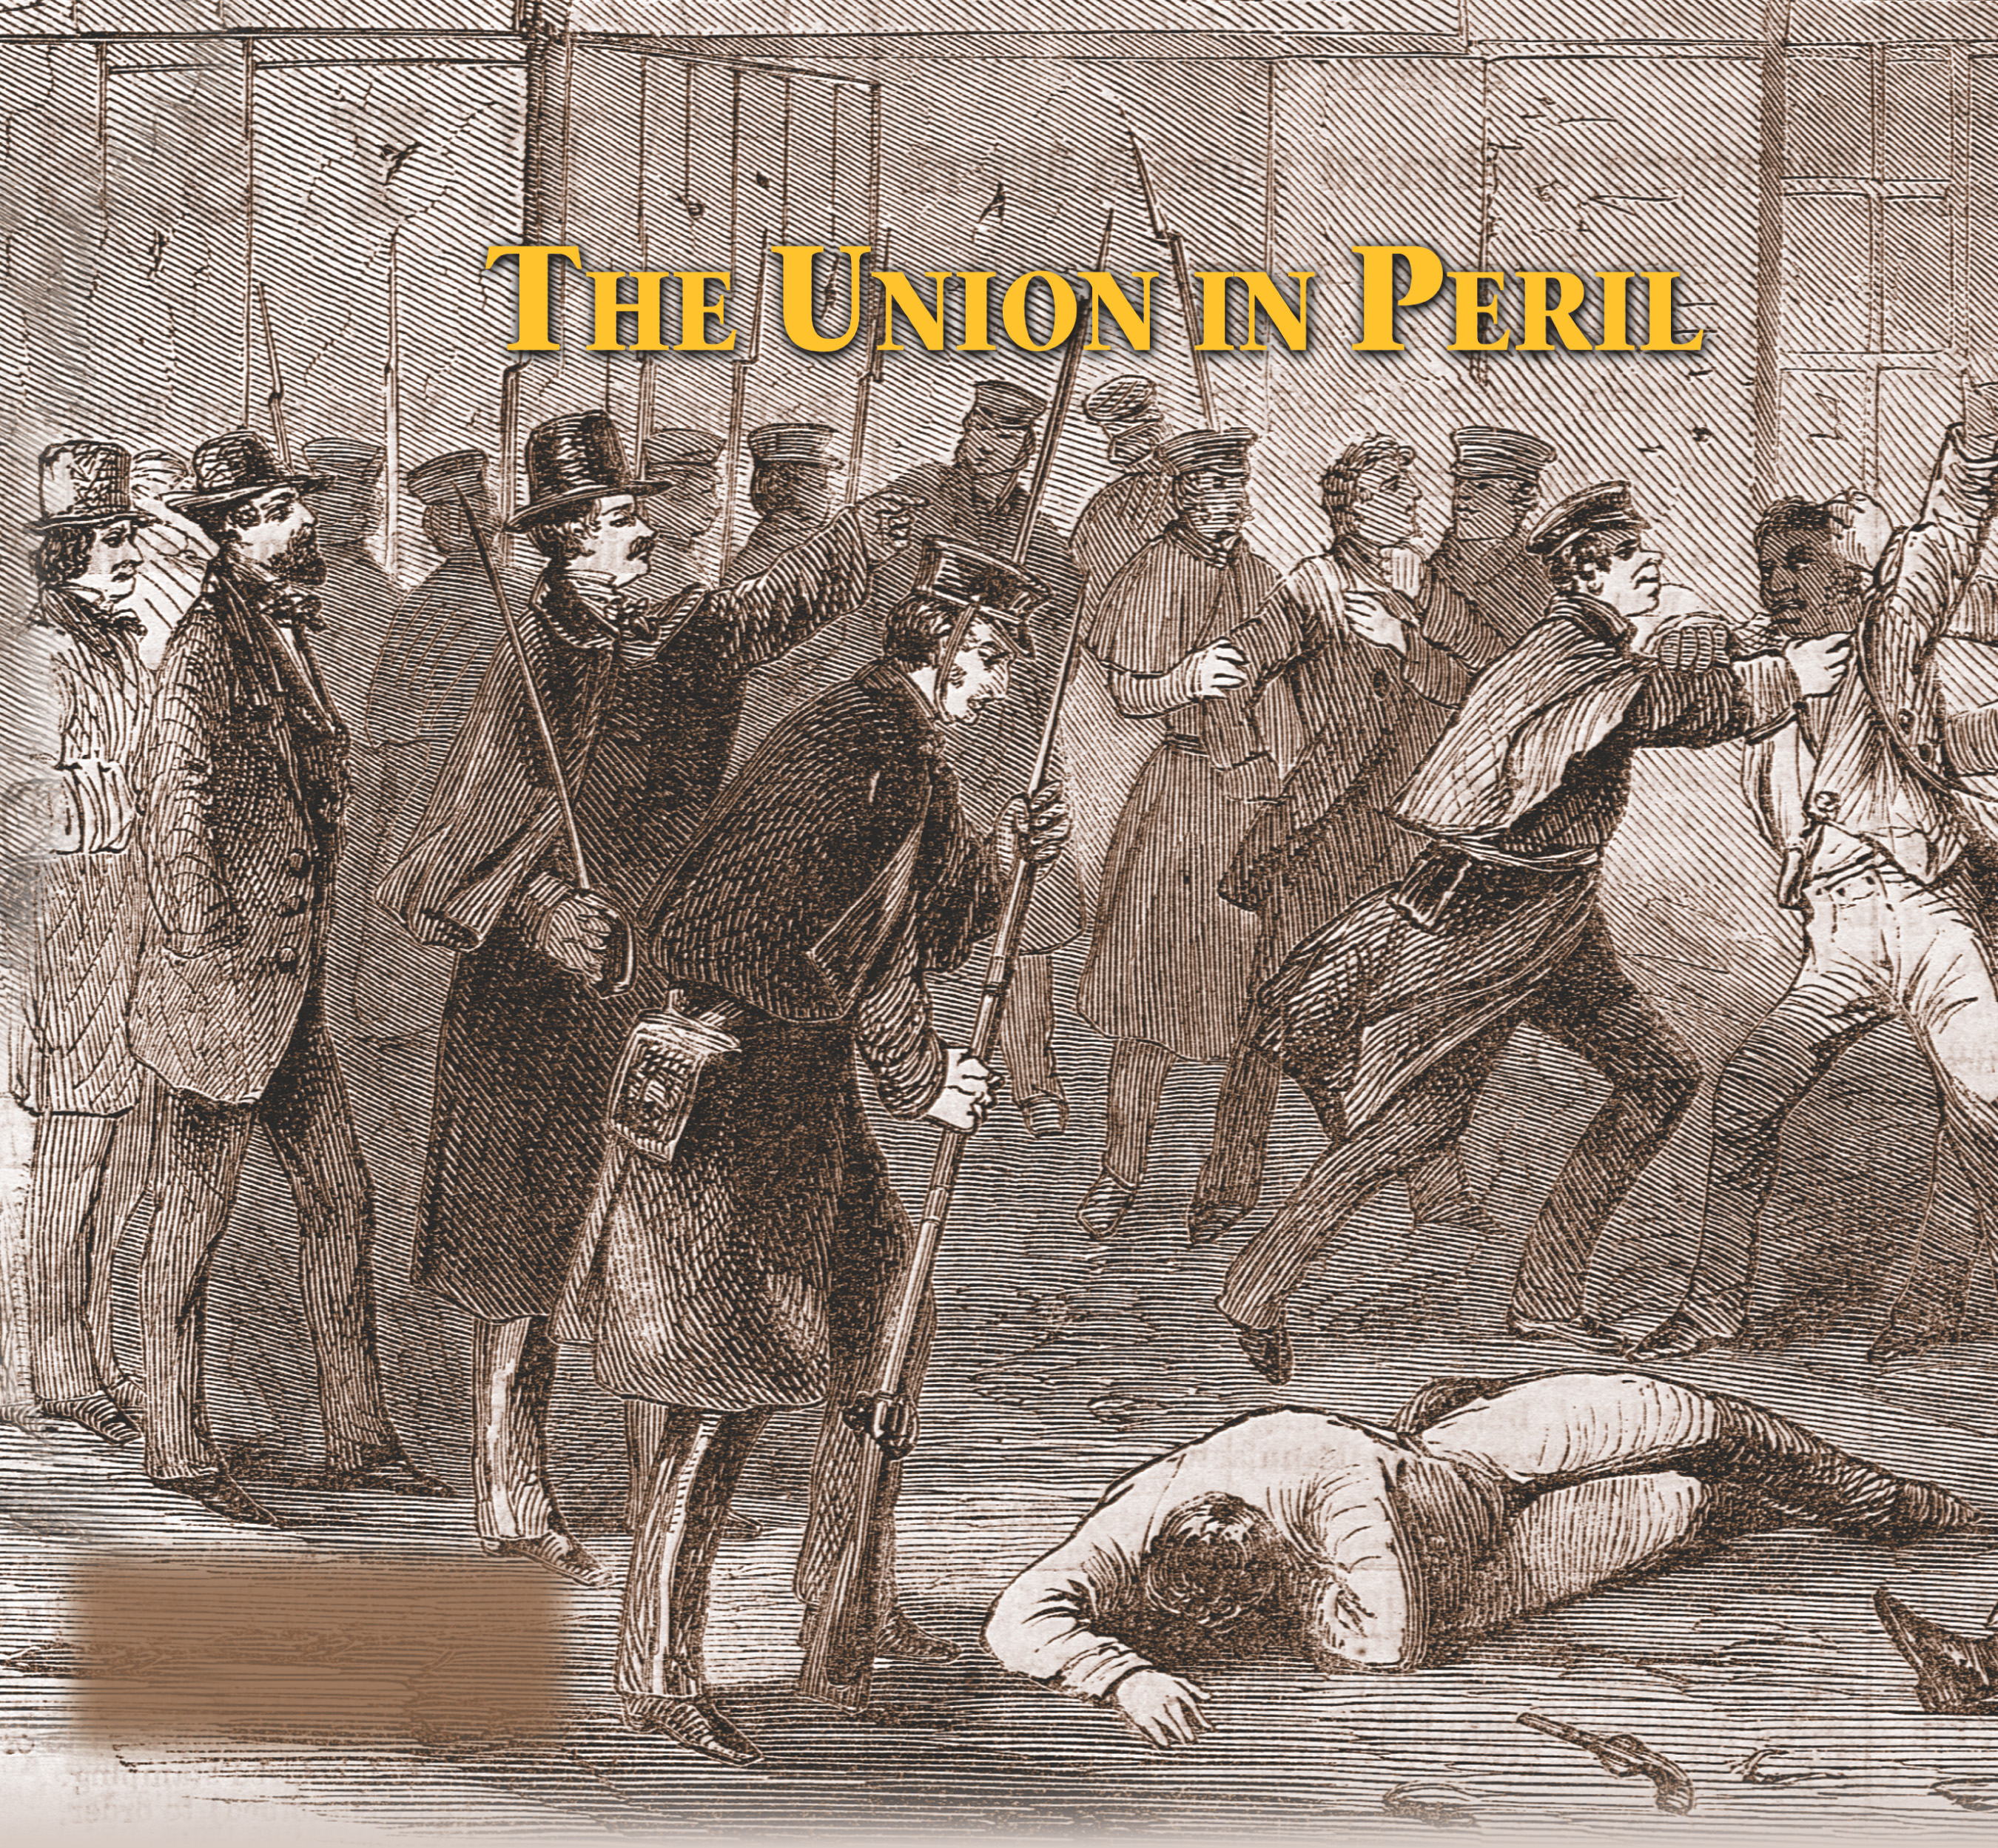 A black and white illustration: soldiers grab a struggling man, while others lie injured on the ground. A title: The Union in Peril.